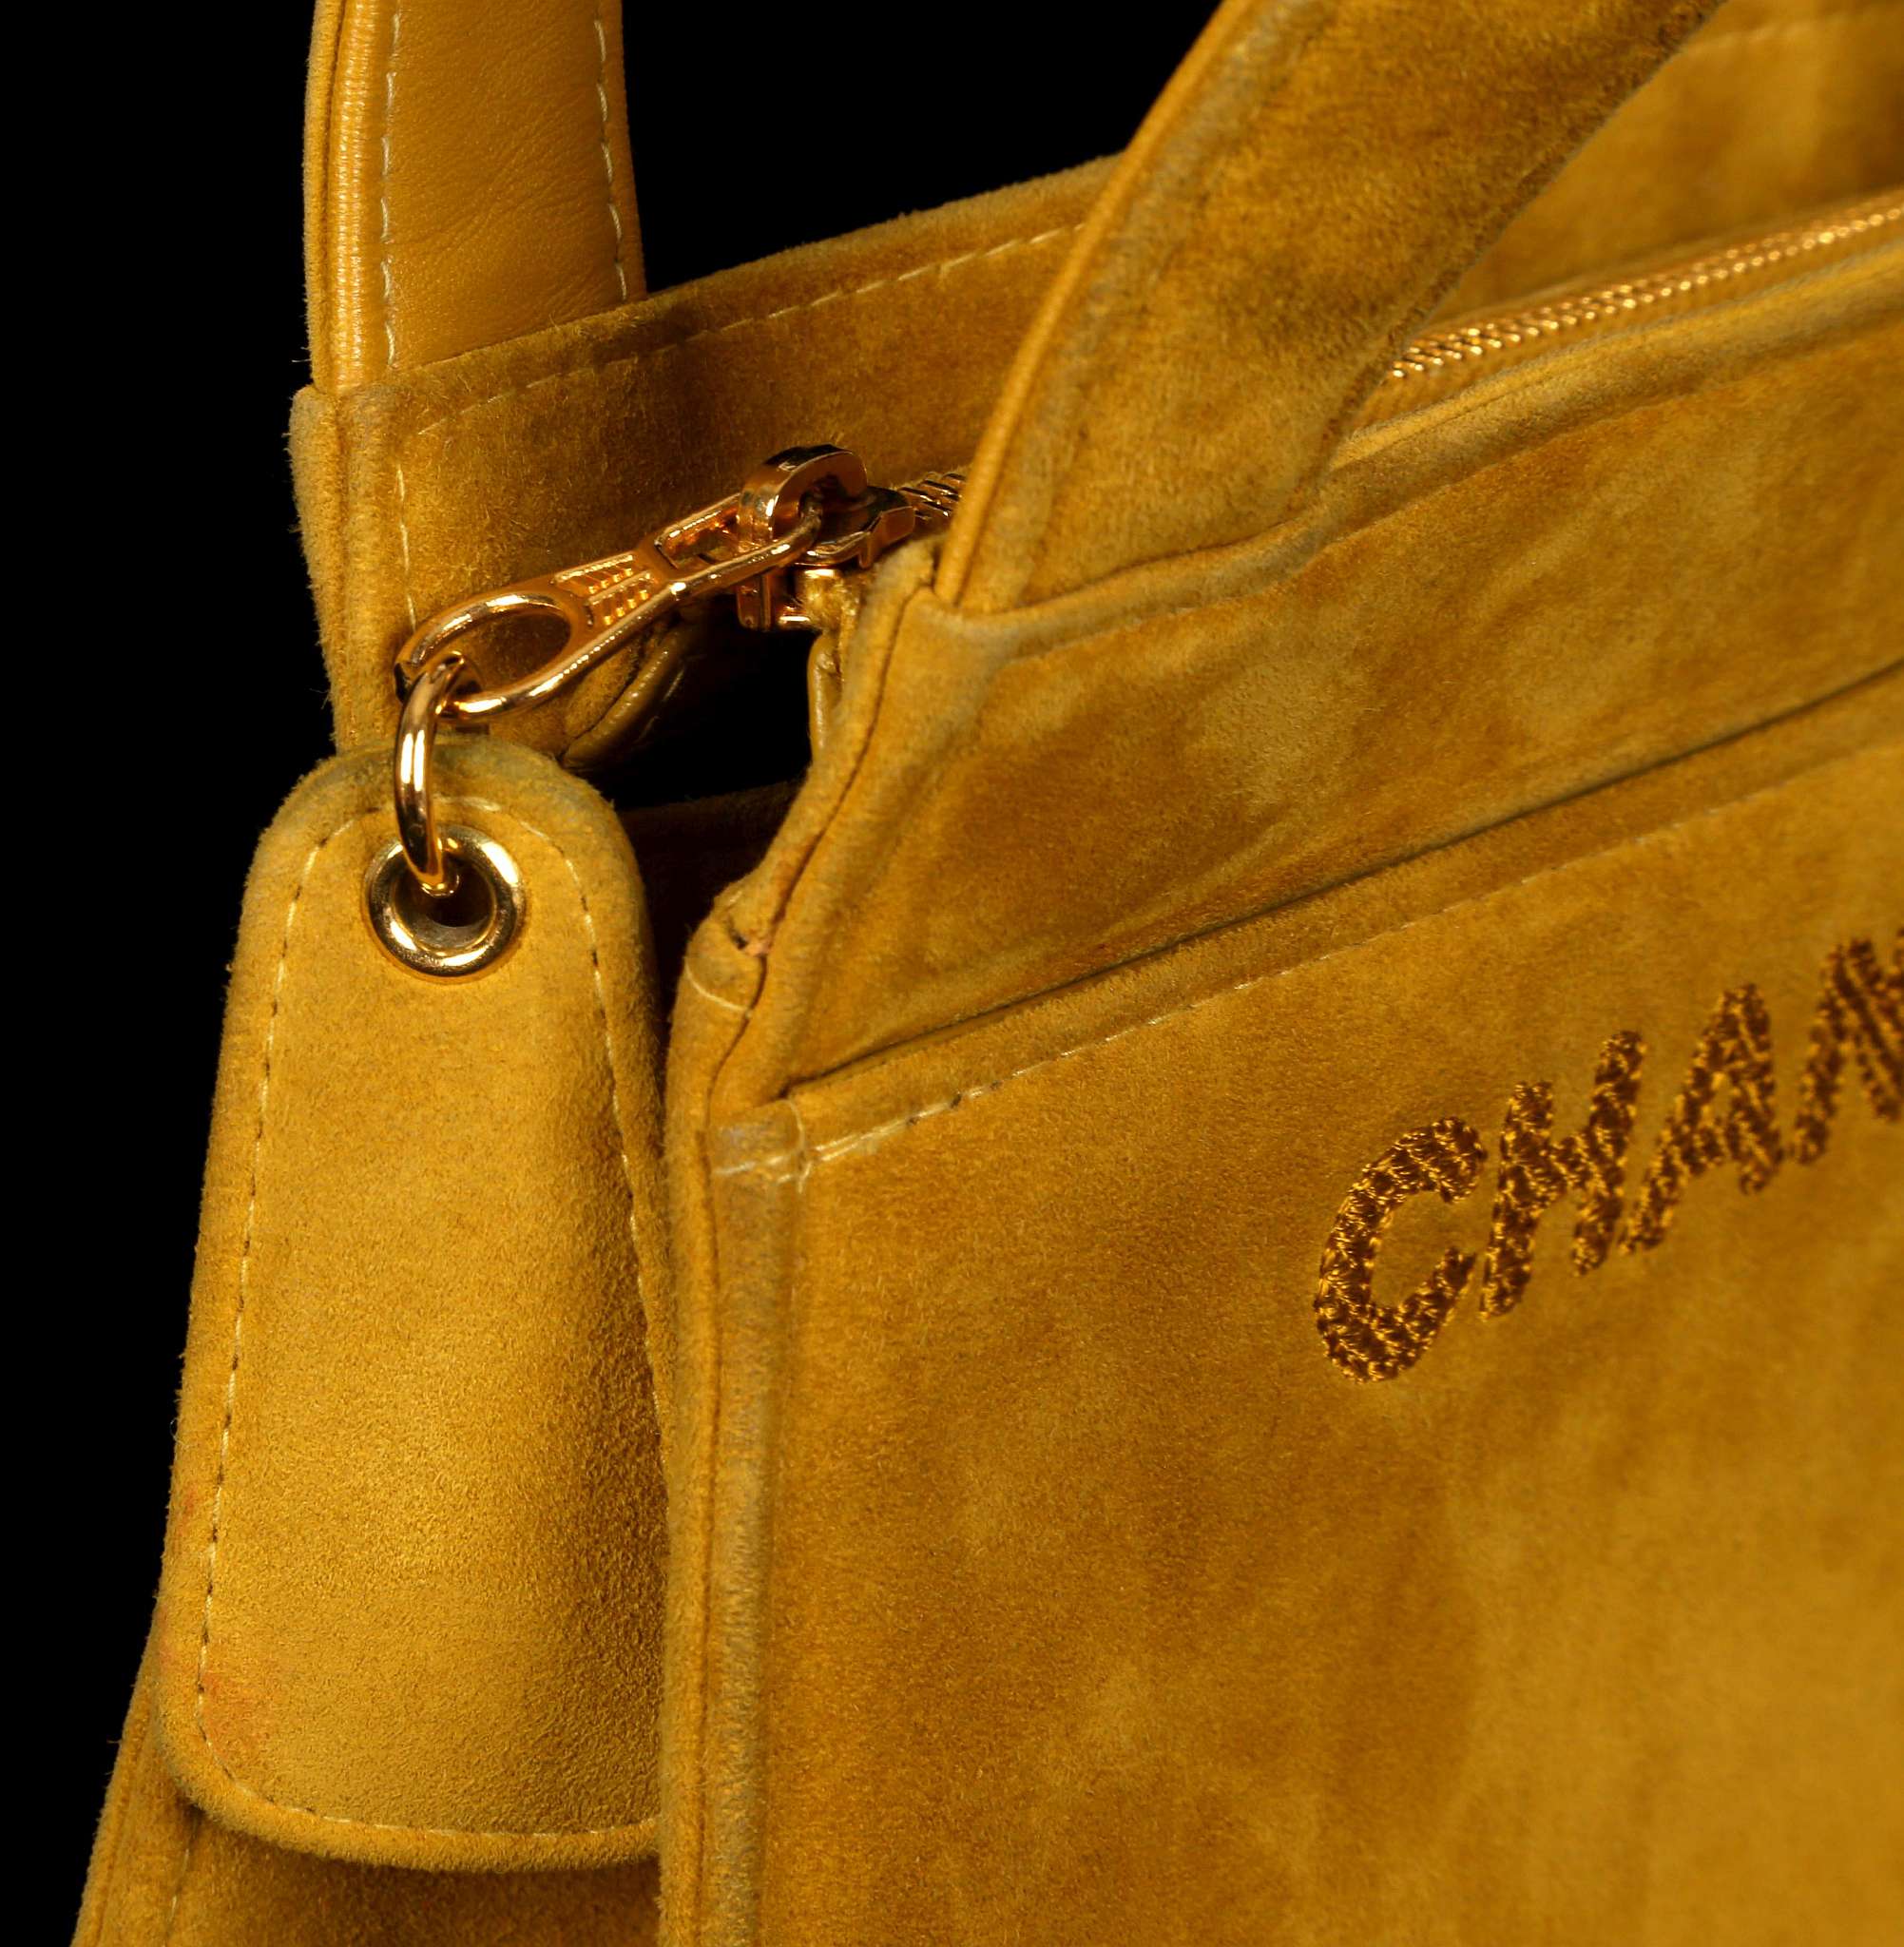 CHANEL EVENING BAG, date code for 1998, mustard ye - Image 8 of 8